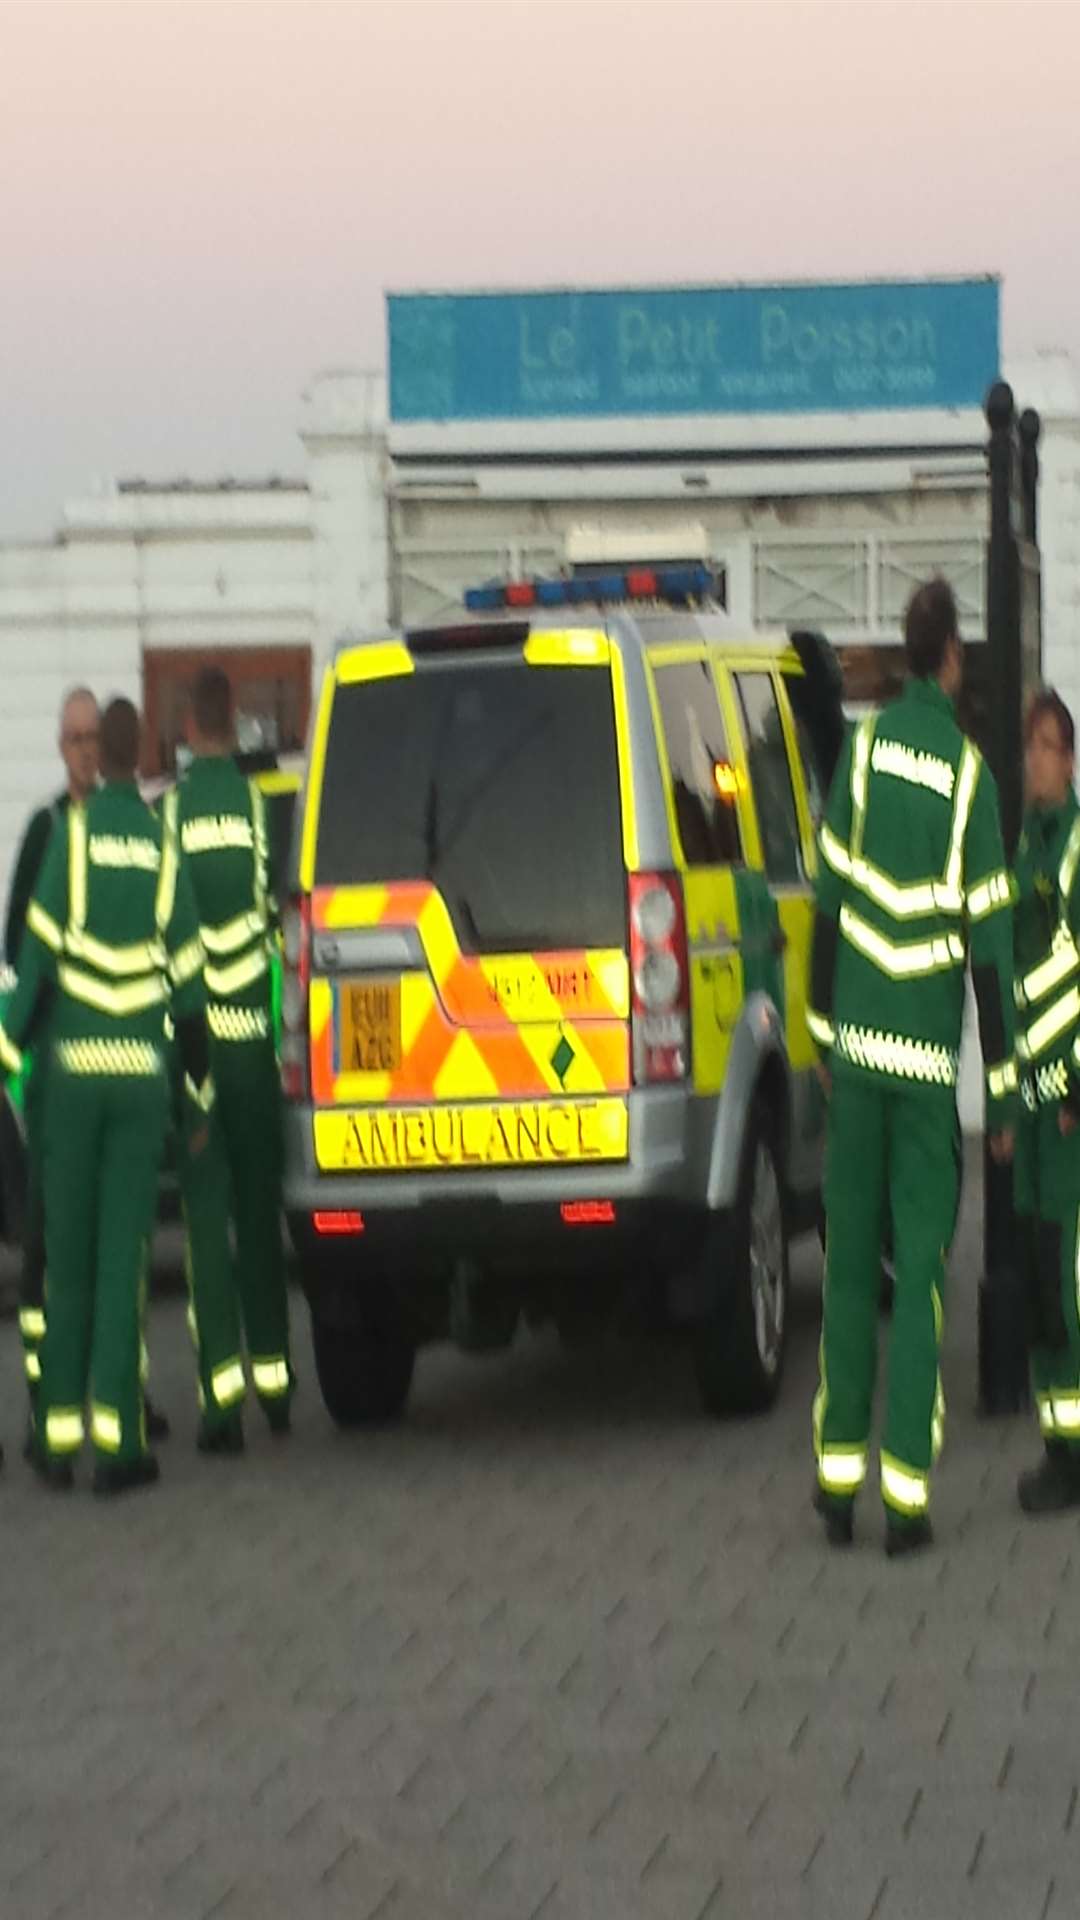 Real paramedics at the scene of an accident